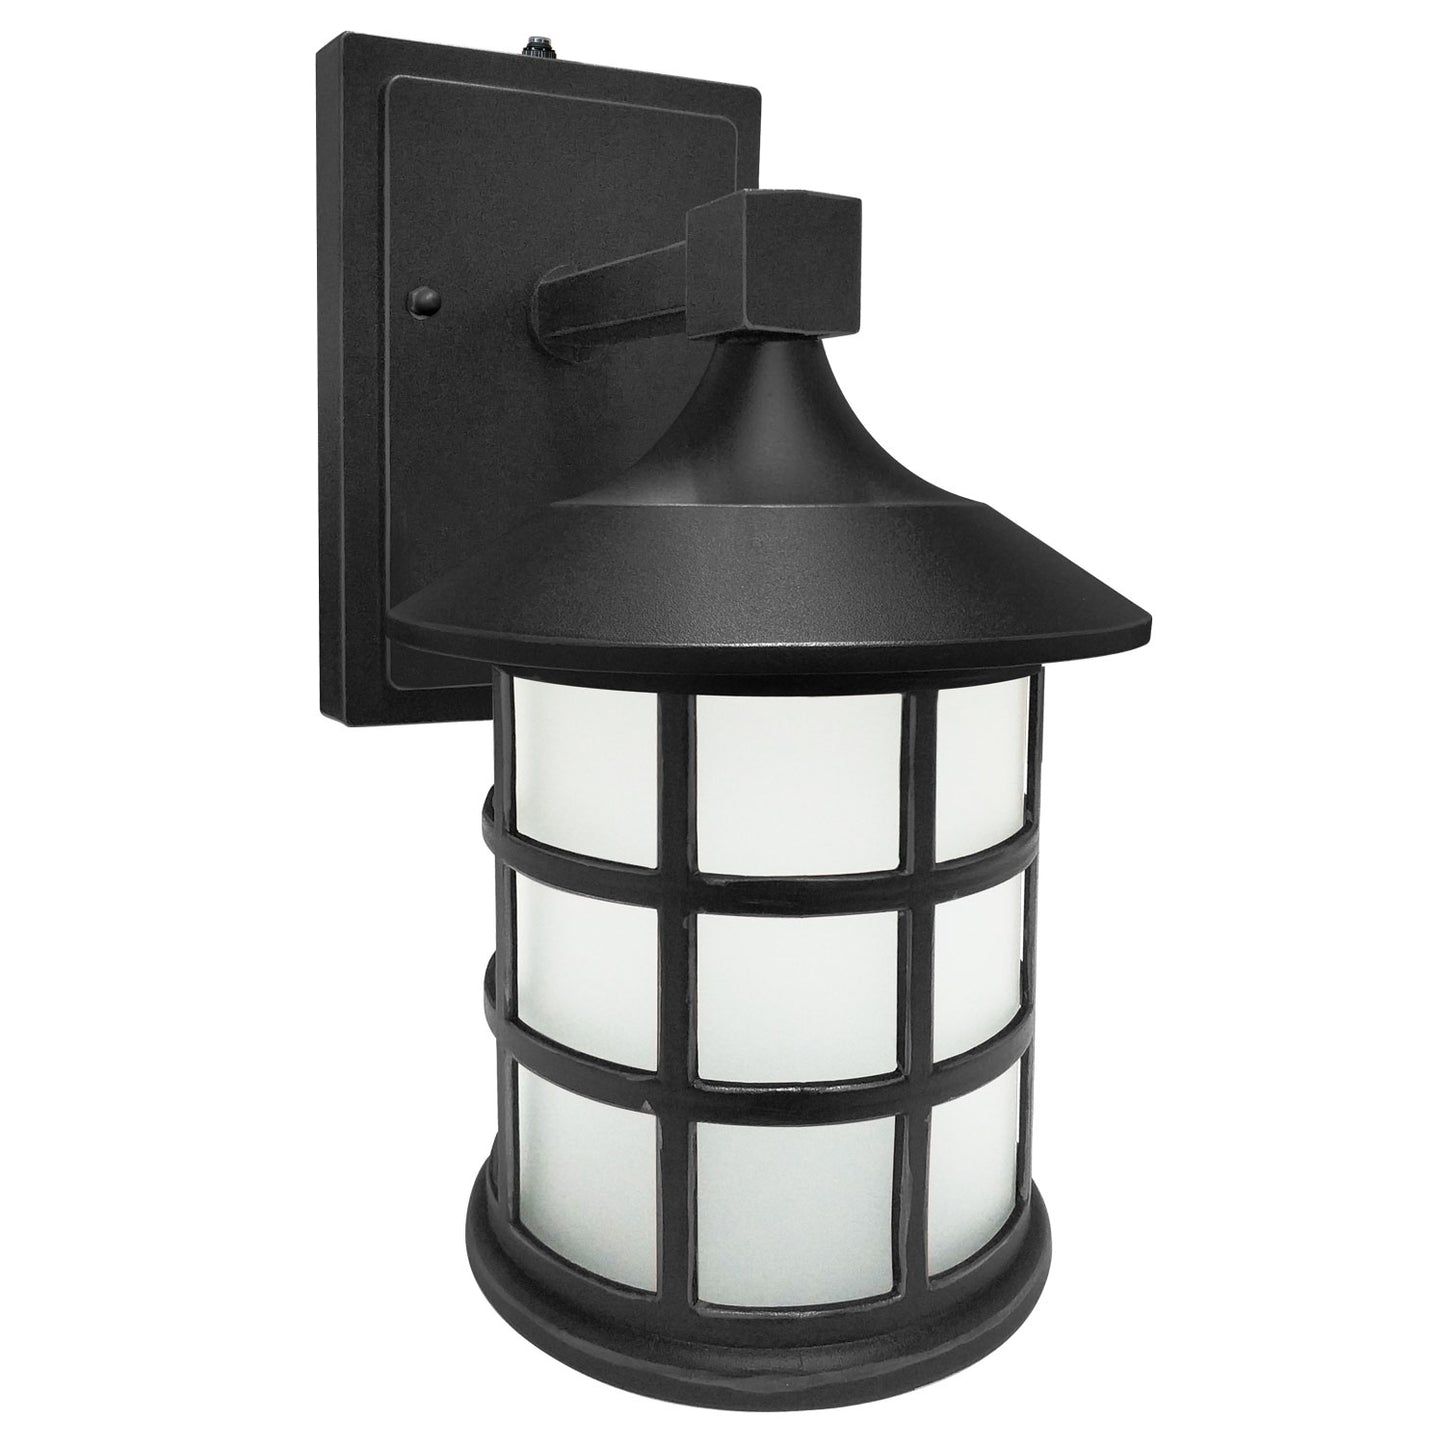 Sunlite 88687-SU Tunable LED Mission Style Lantern Outdoor Light Fixture, 9 Watts (60W Equivalent), 600 Lumens, Built-in Photocell, Black Finish, Opaque White Lens, Color Temperature Tunable 3000K/4000K/5000K